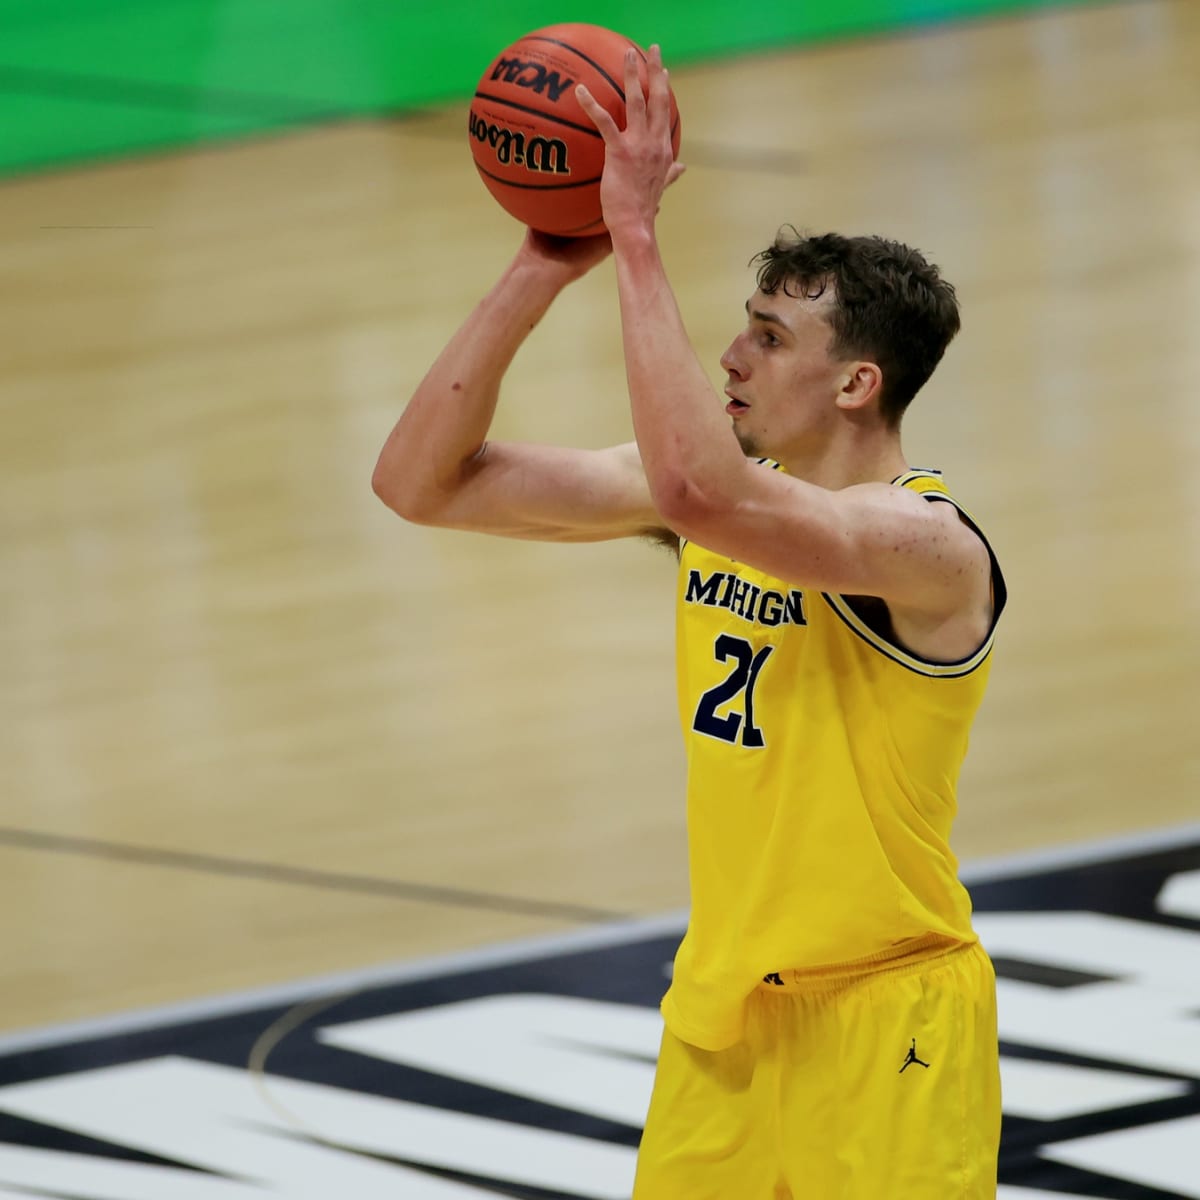 A Letter to My Michigan Family by Franz Wagner